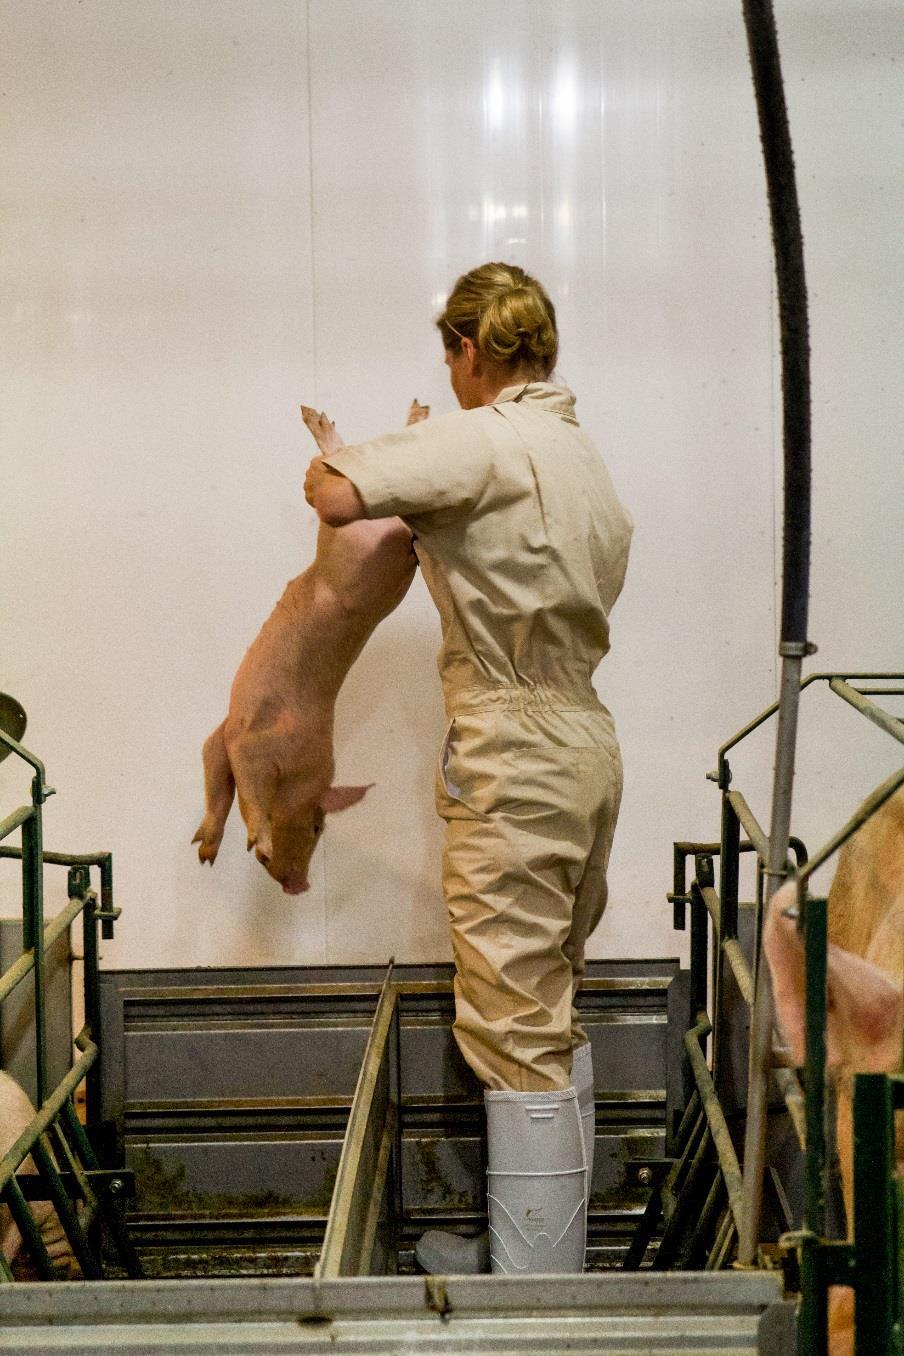 To properly catch a pig 1. Securely grasp the hind leg of the pig o If the pig is heavy, use your other hand to grasp its other hind leg 2.